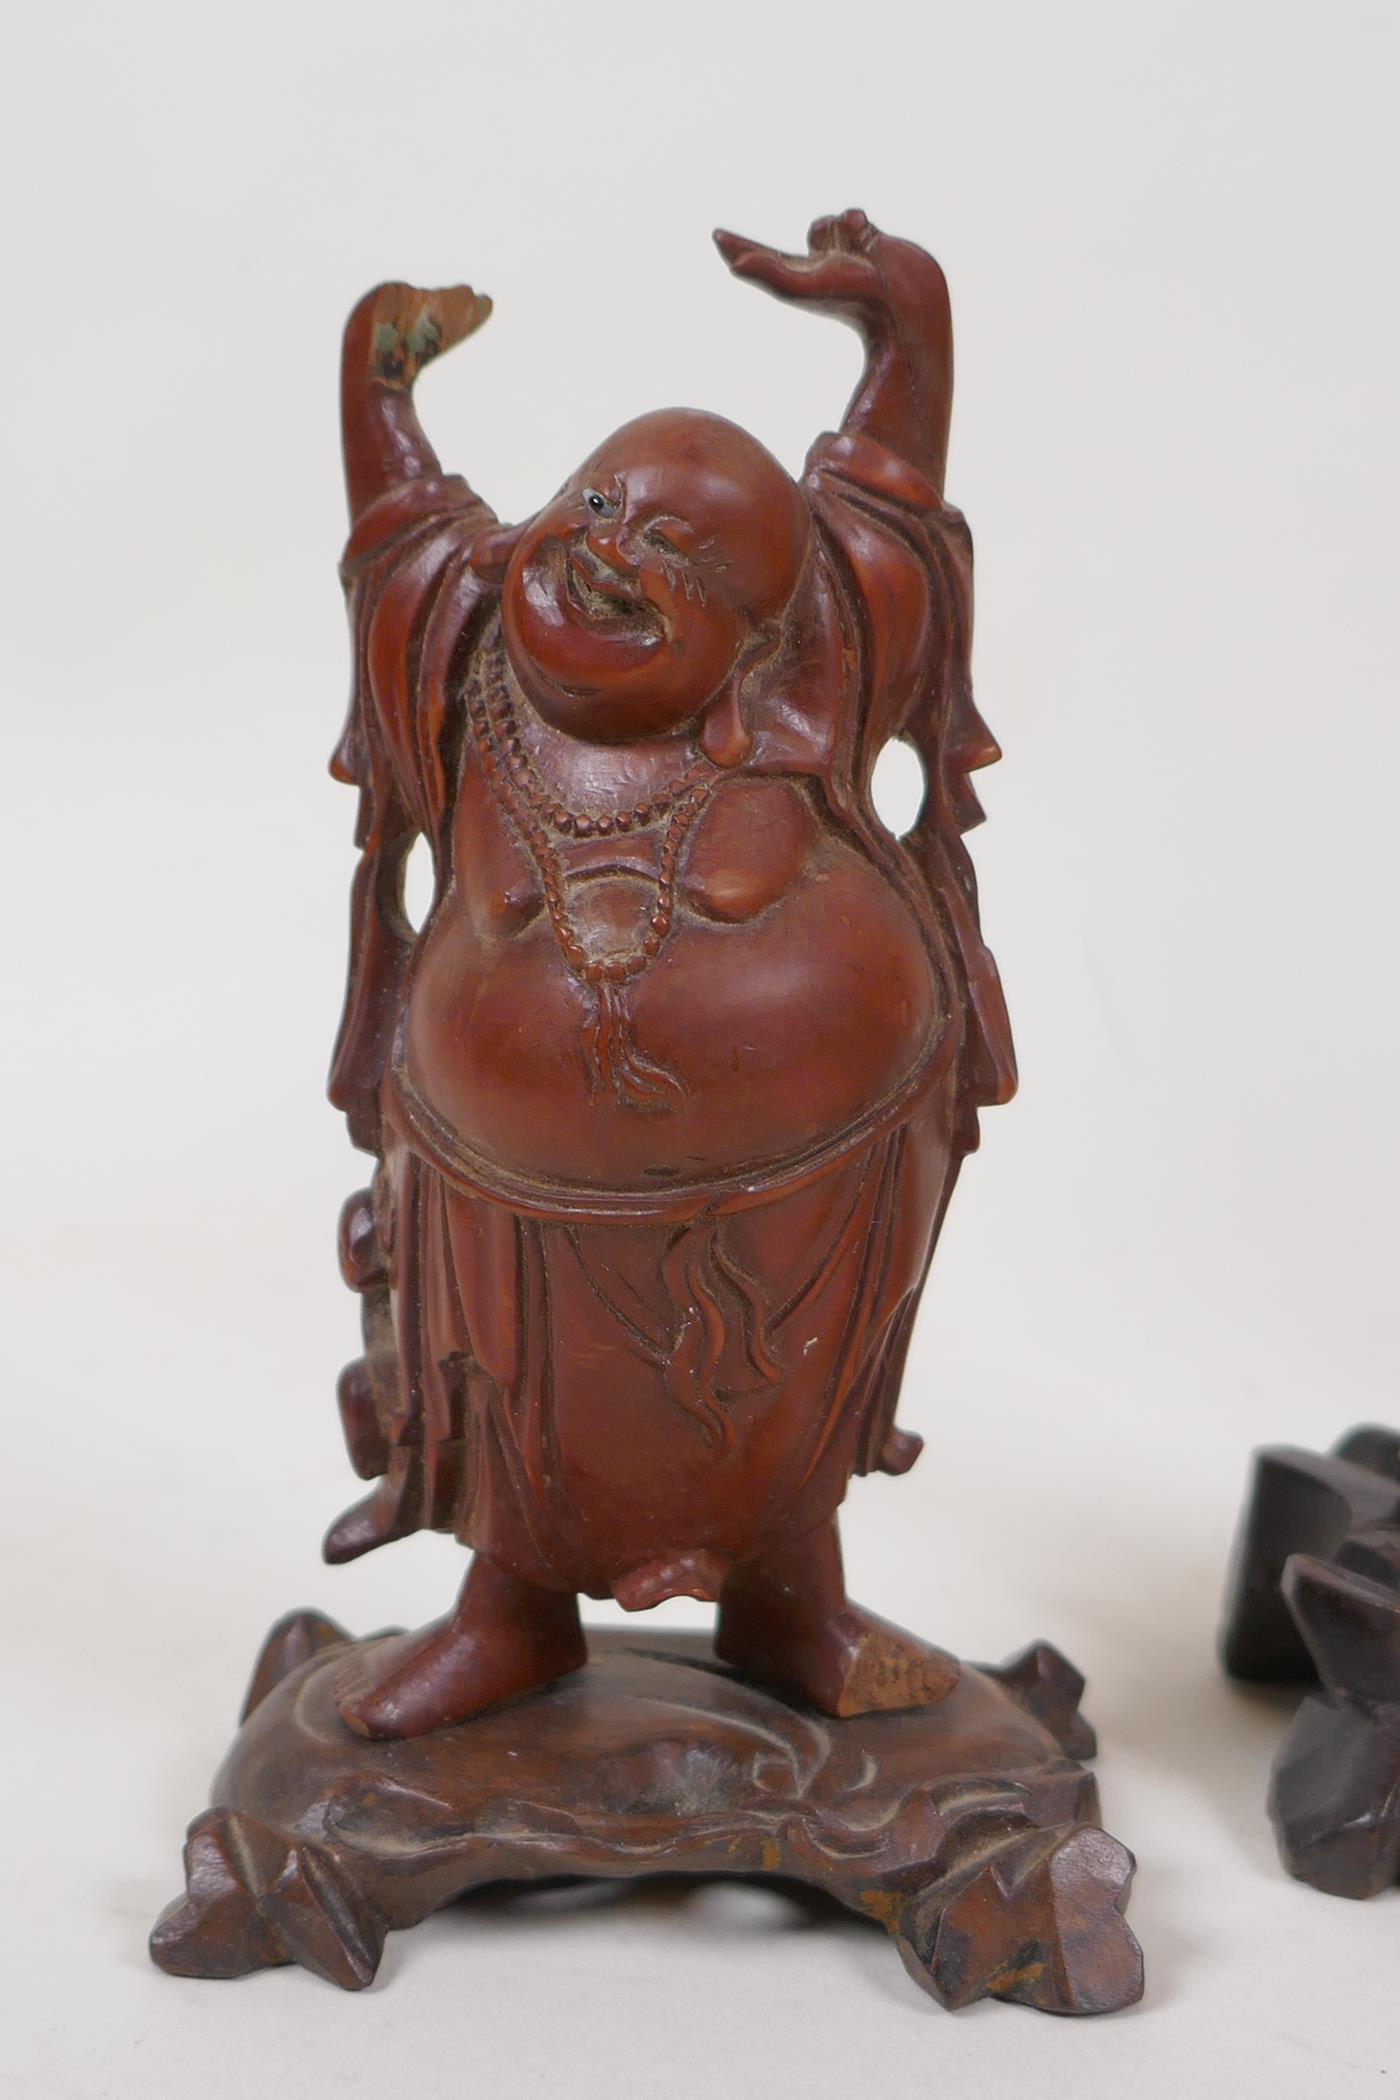 Seven Chinese carved hardwood figures, with depictions of Shao Lao and Buddha, largest 9½" high, AF - Image 2 of 8